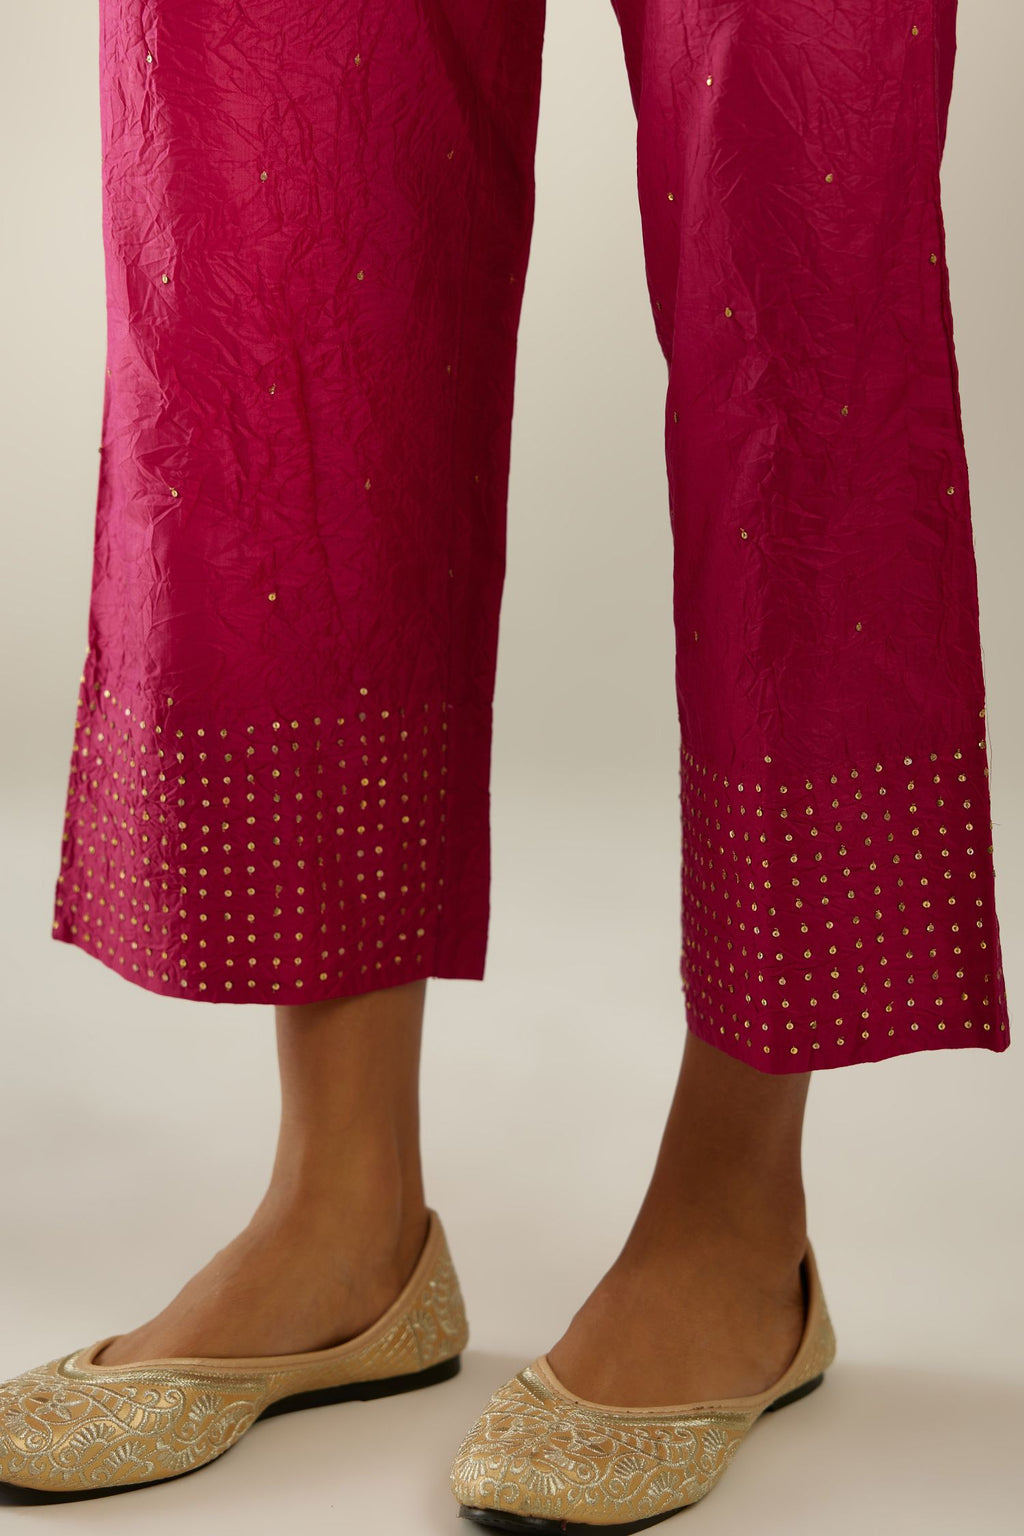 Jazzberry jam hand crushed silk straight pants detailed with gold sequins at hem and a single sequin buti is sprayed all over the pants and side pockets